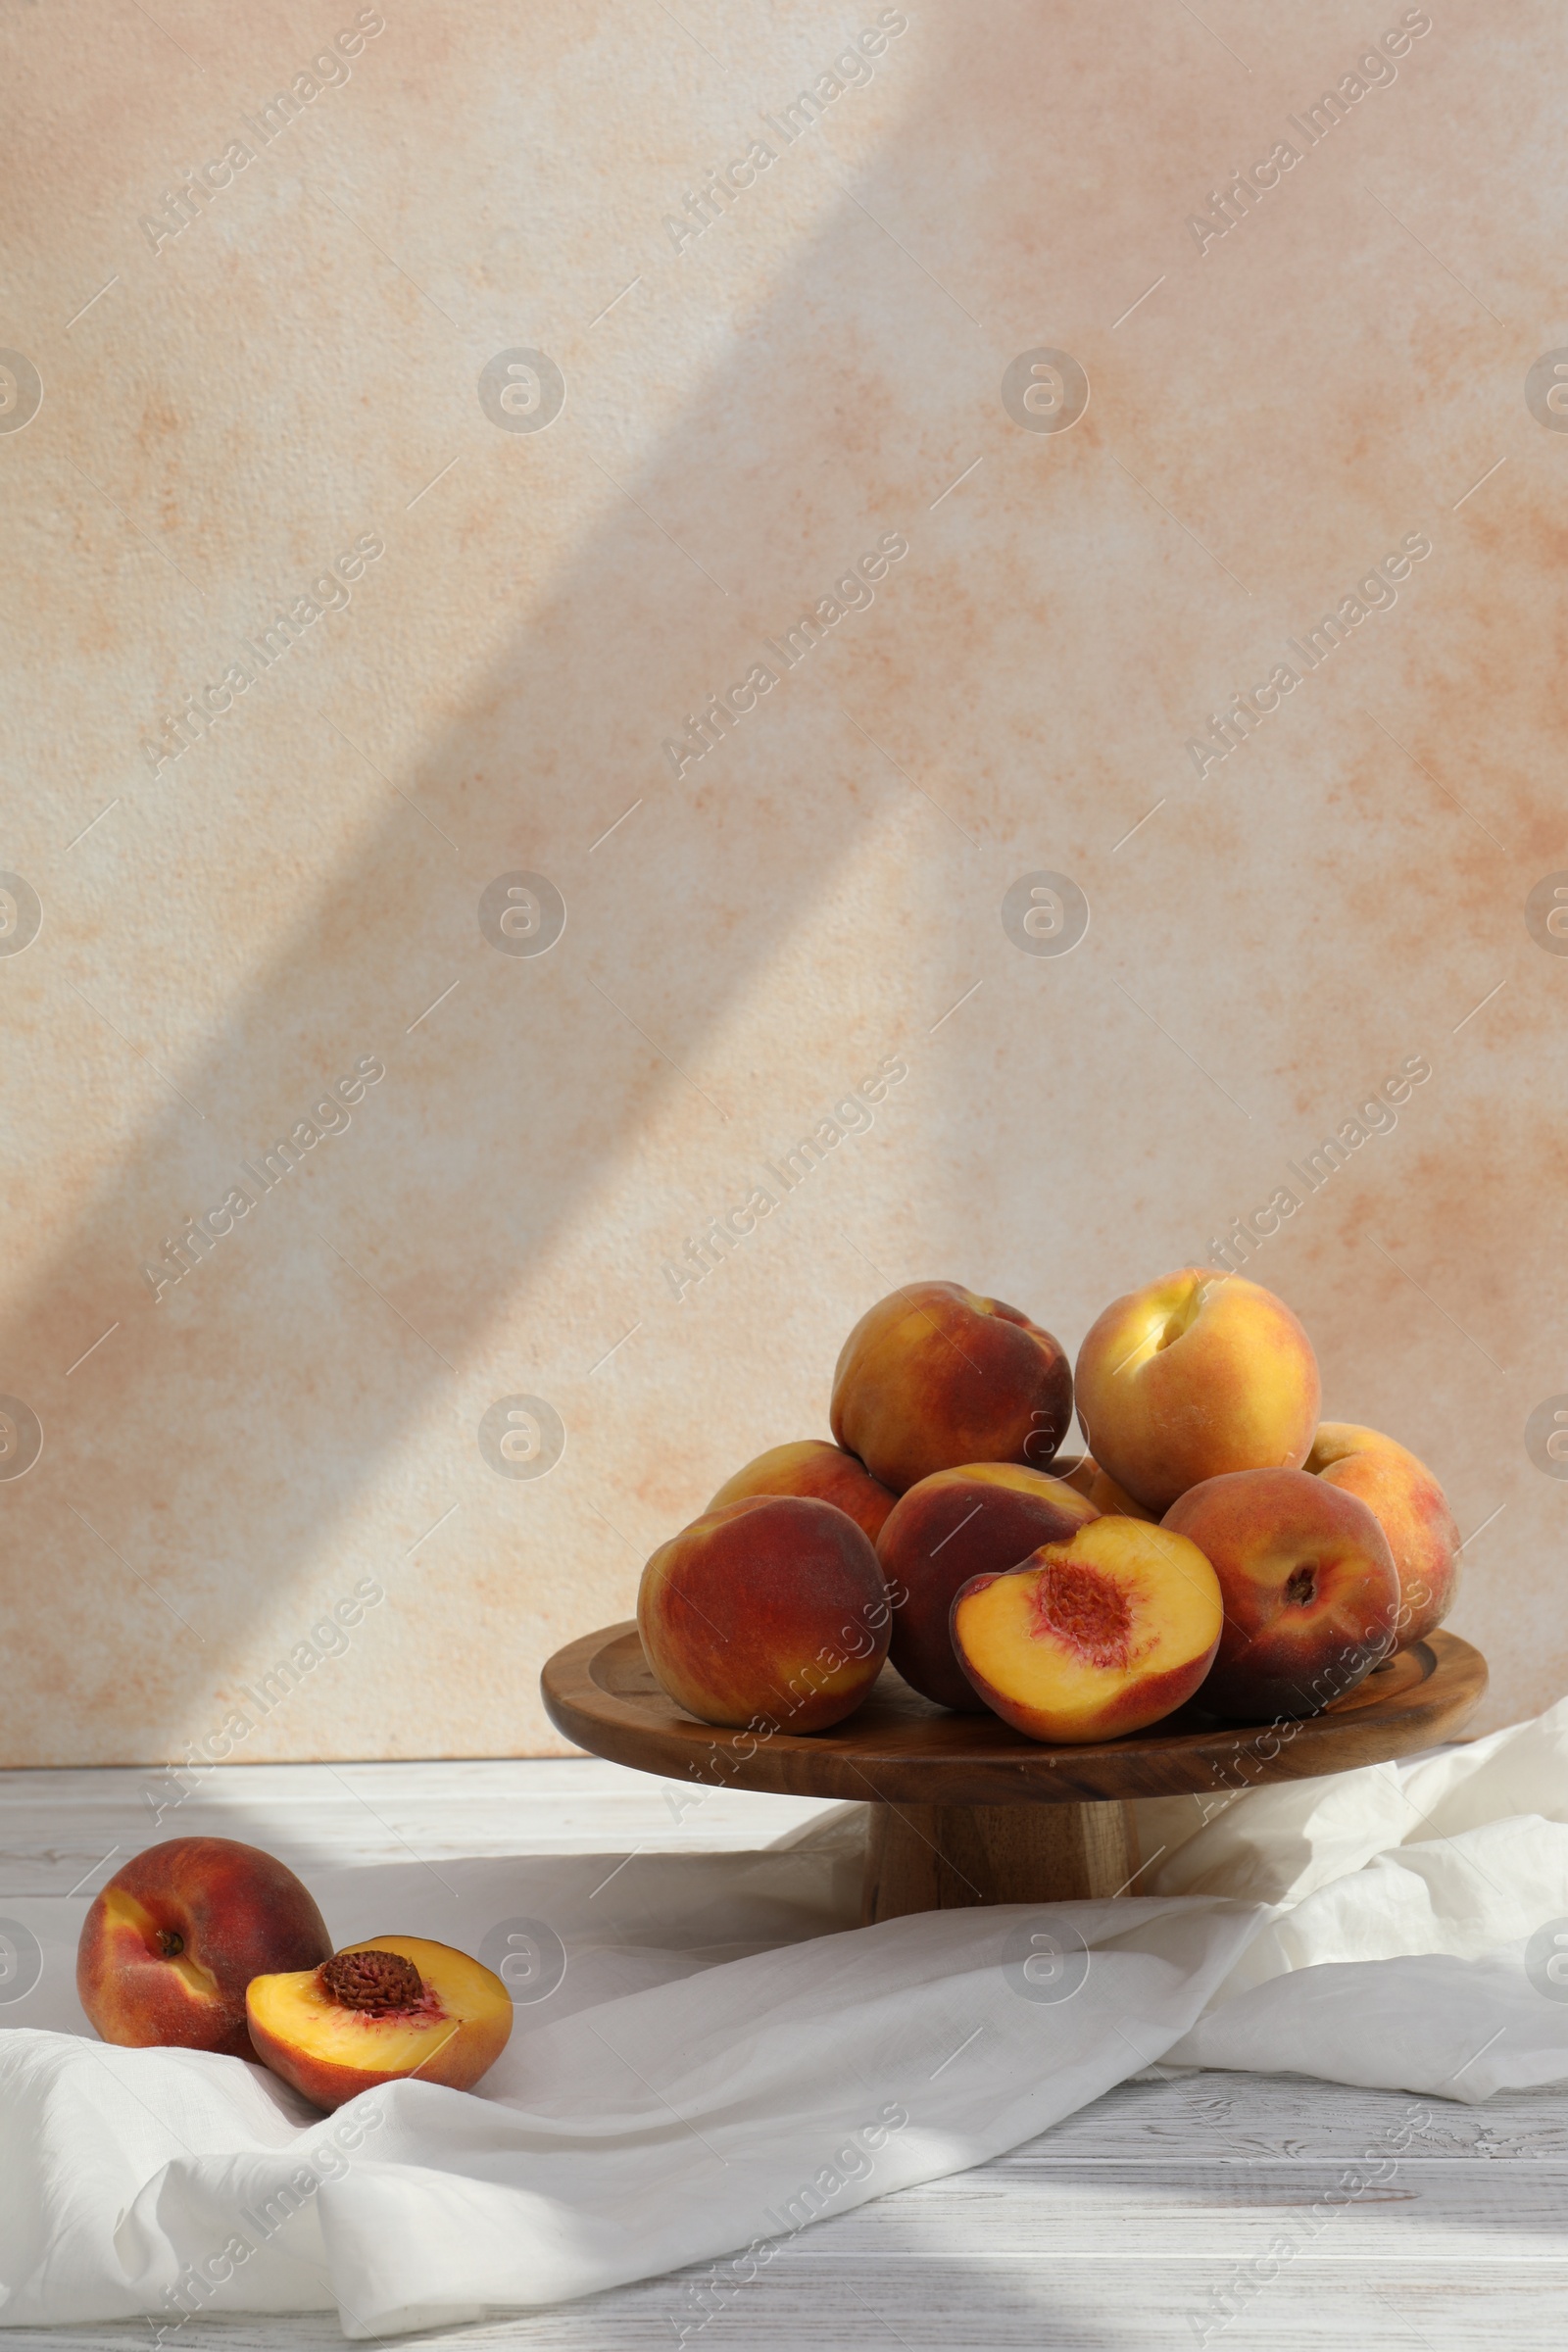 Photo of Stand with juicy peaches on white table against beige background